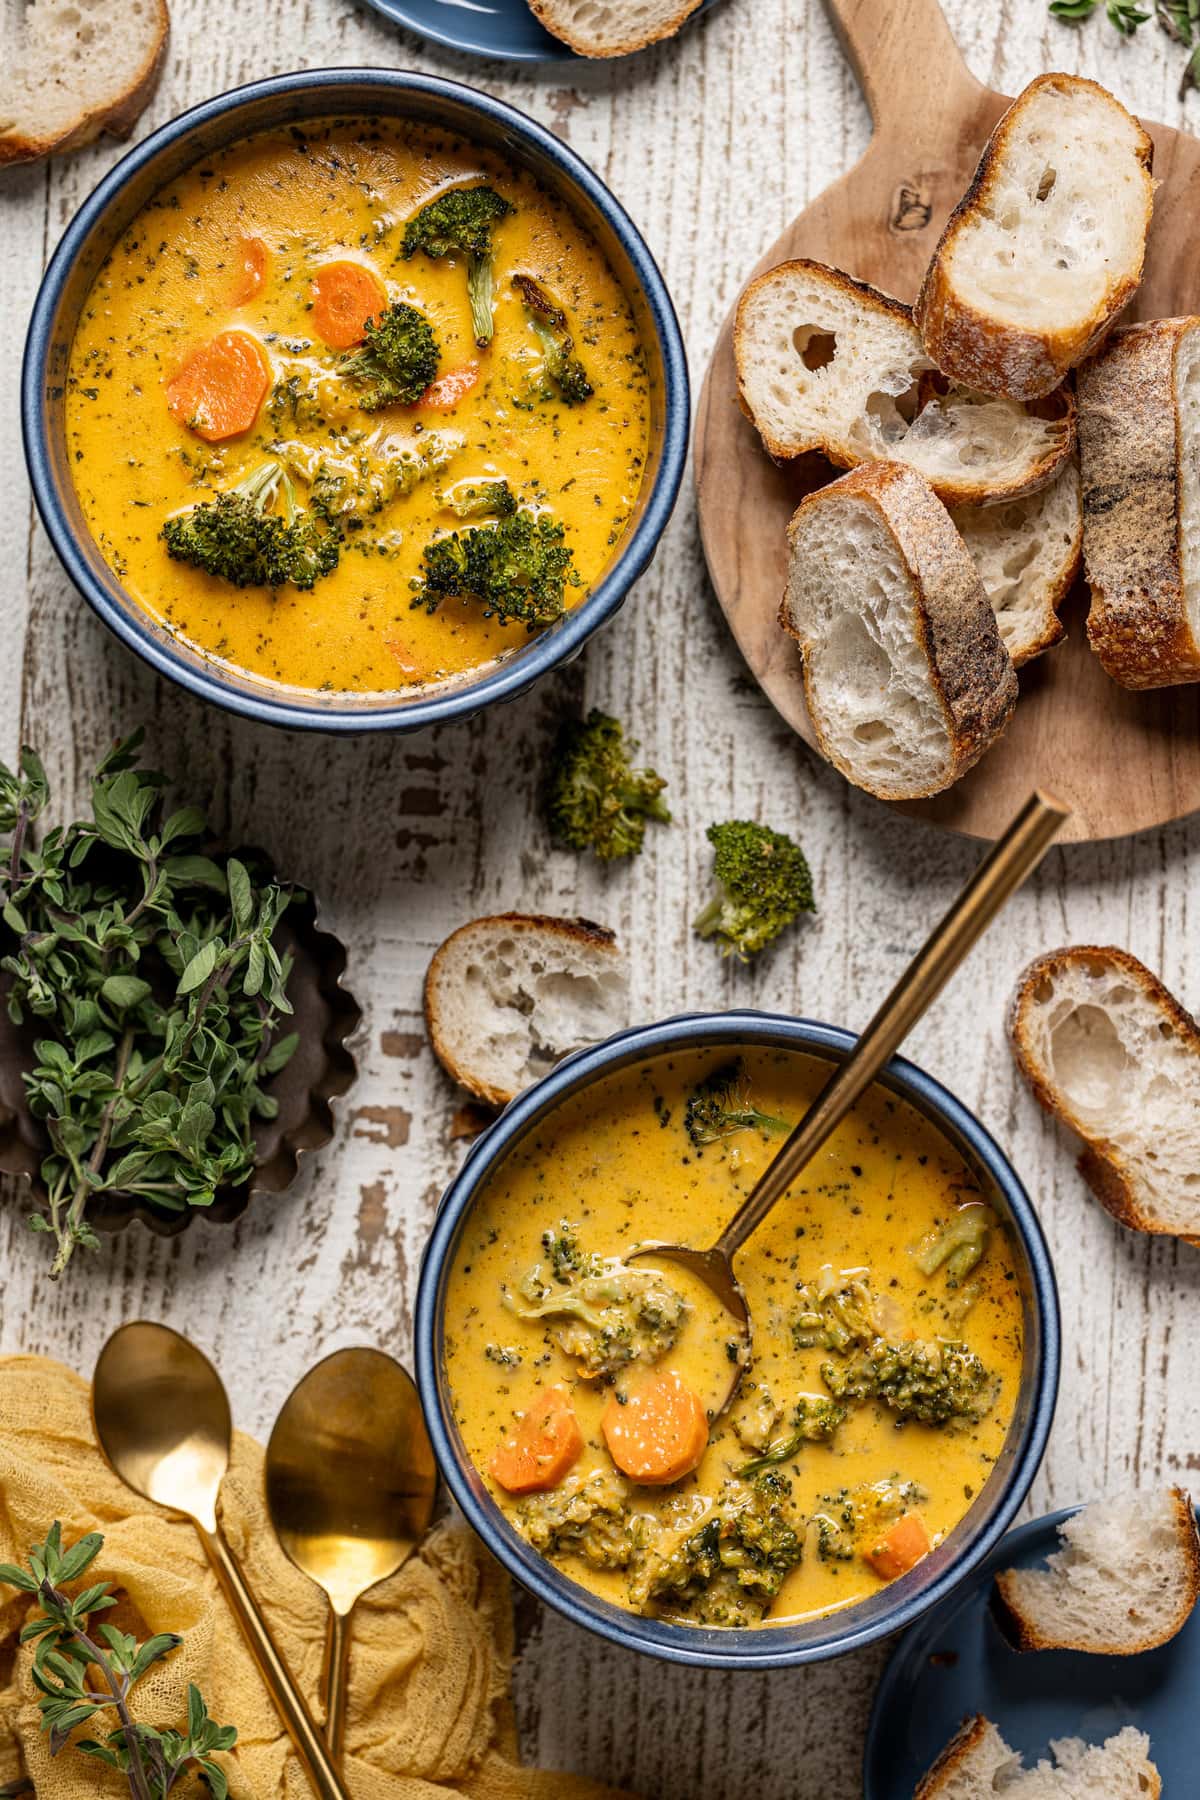 Overhead shot of two bowls of Roasted Broccoli Cheddar Soup next to slices of bread